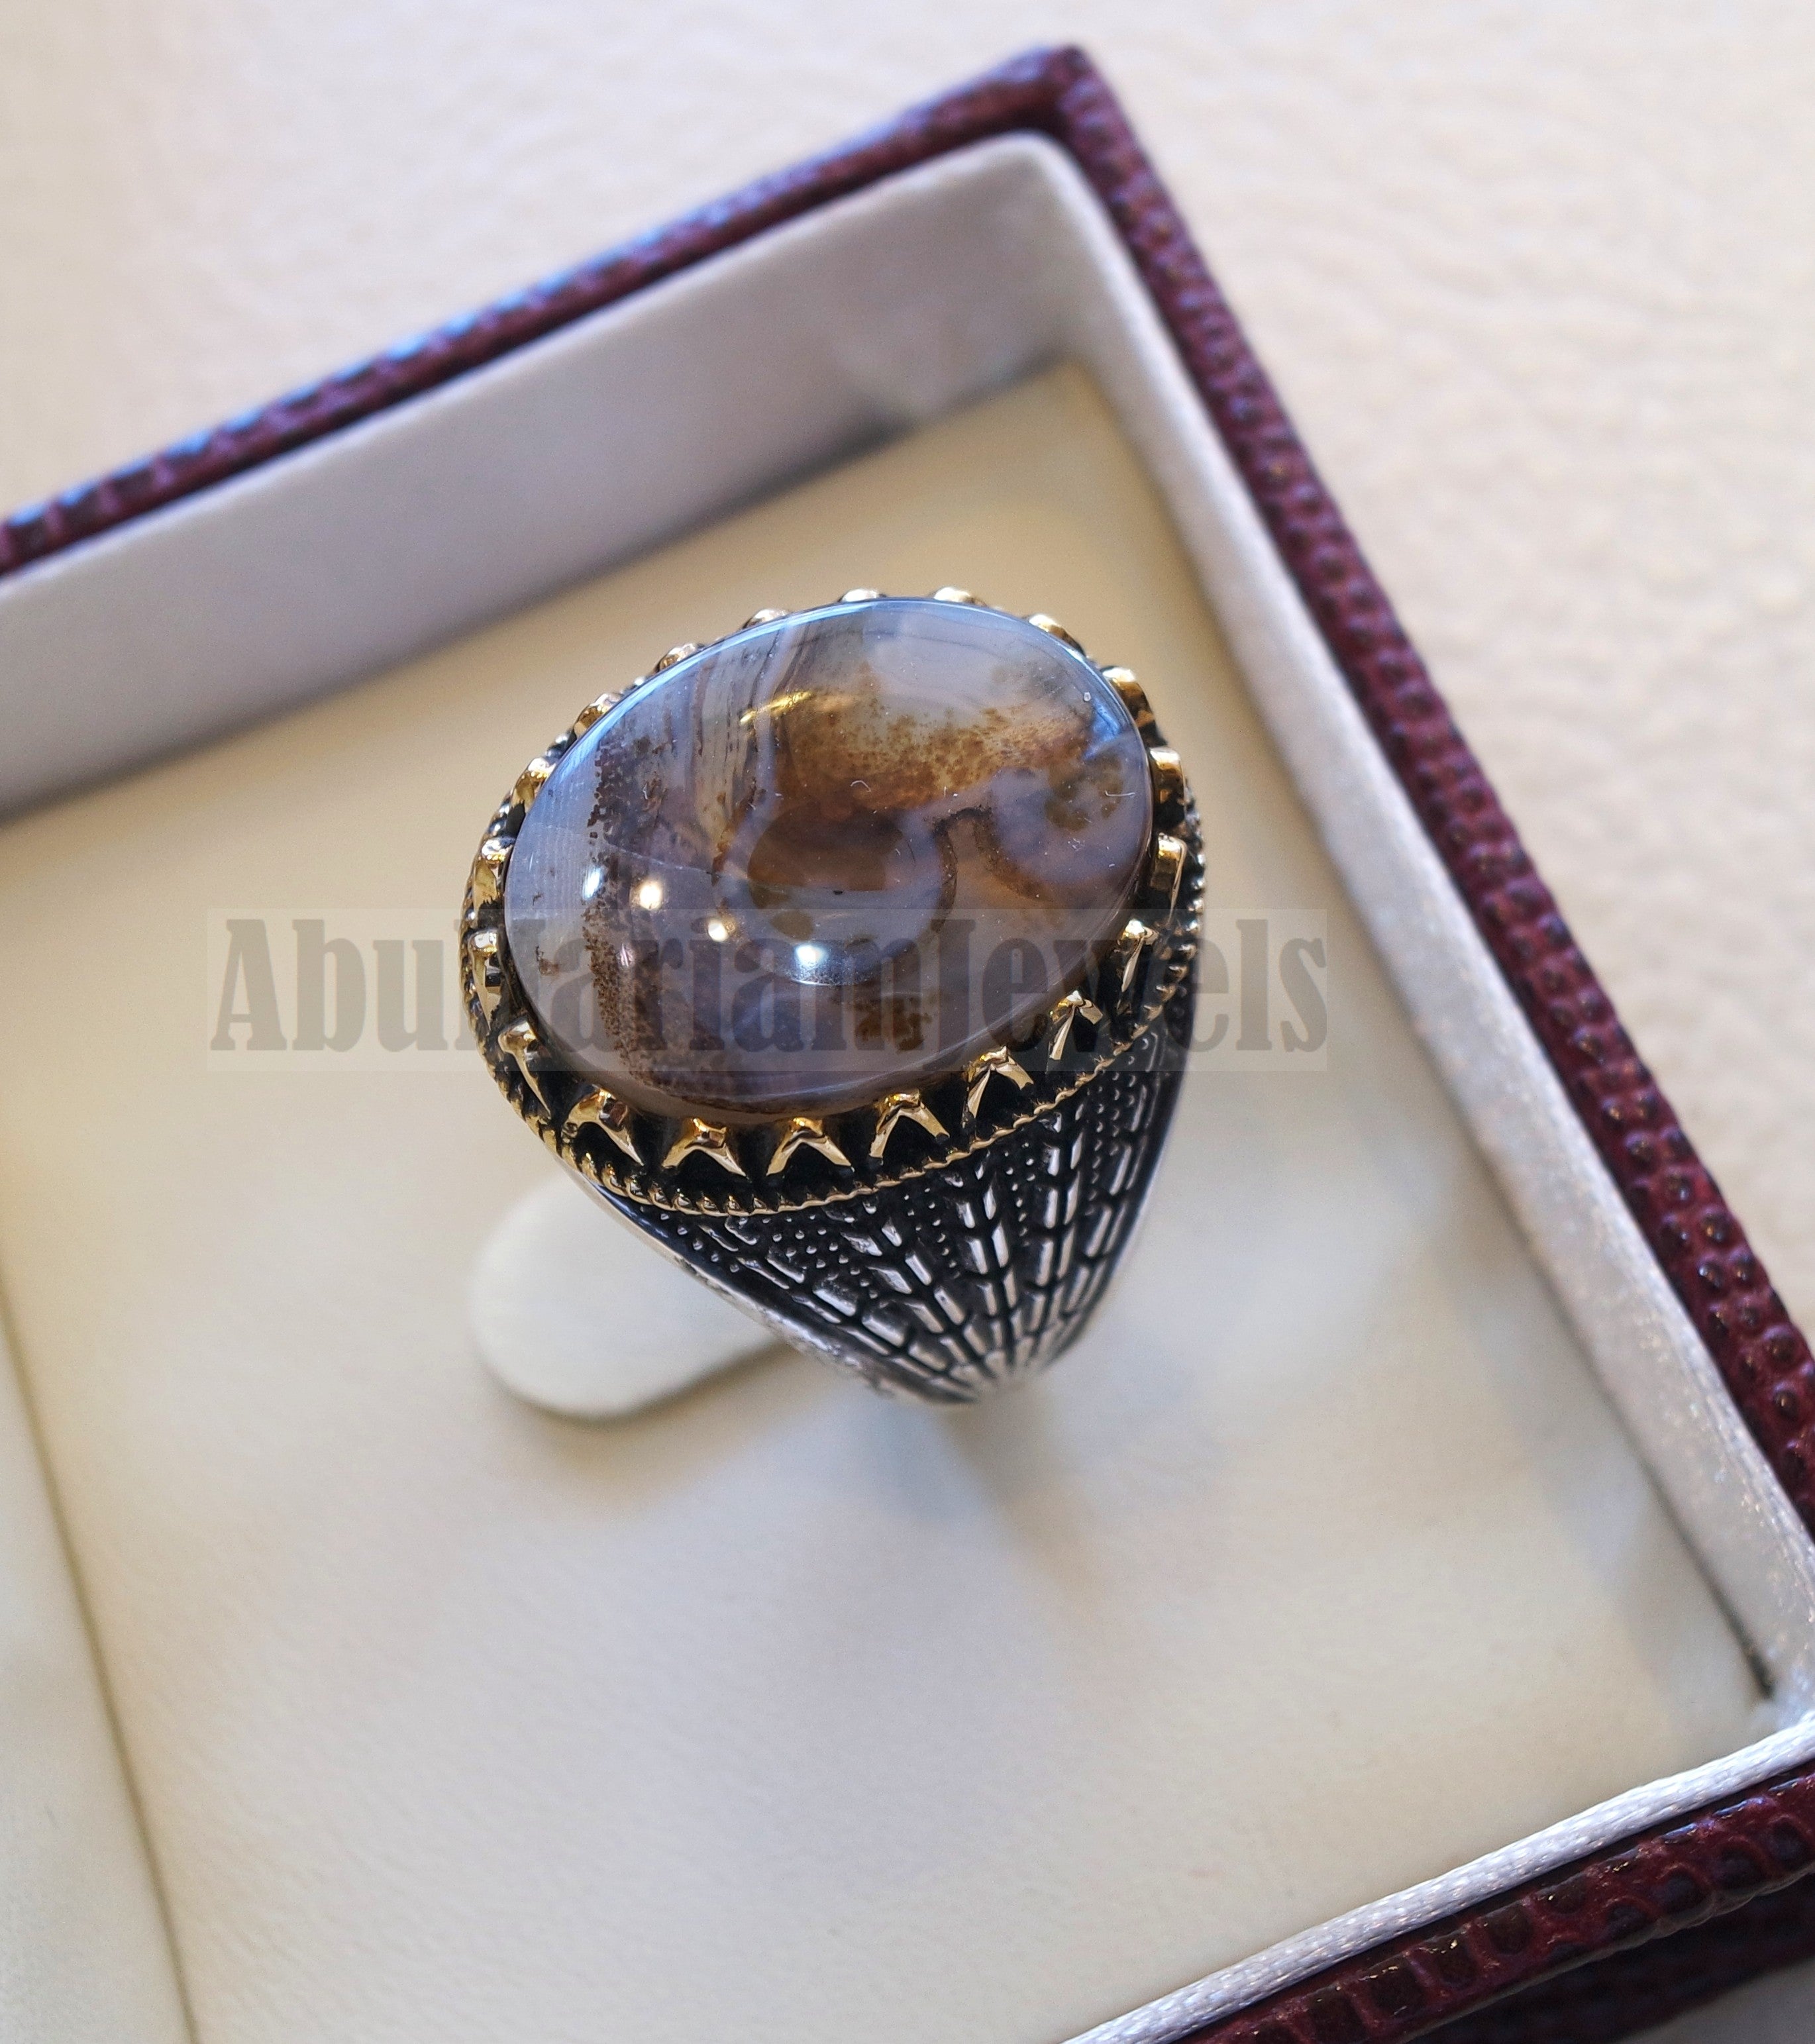 Oval yamani aqeeq natural semi precious multi color agate gem men ring sterling silver 925 and bronze jewelry all sizes  1007 عقيق يماني